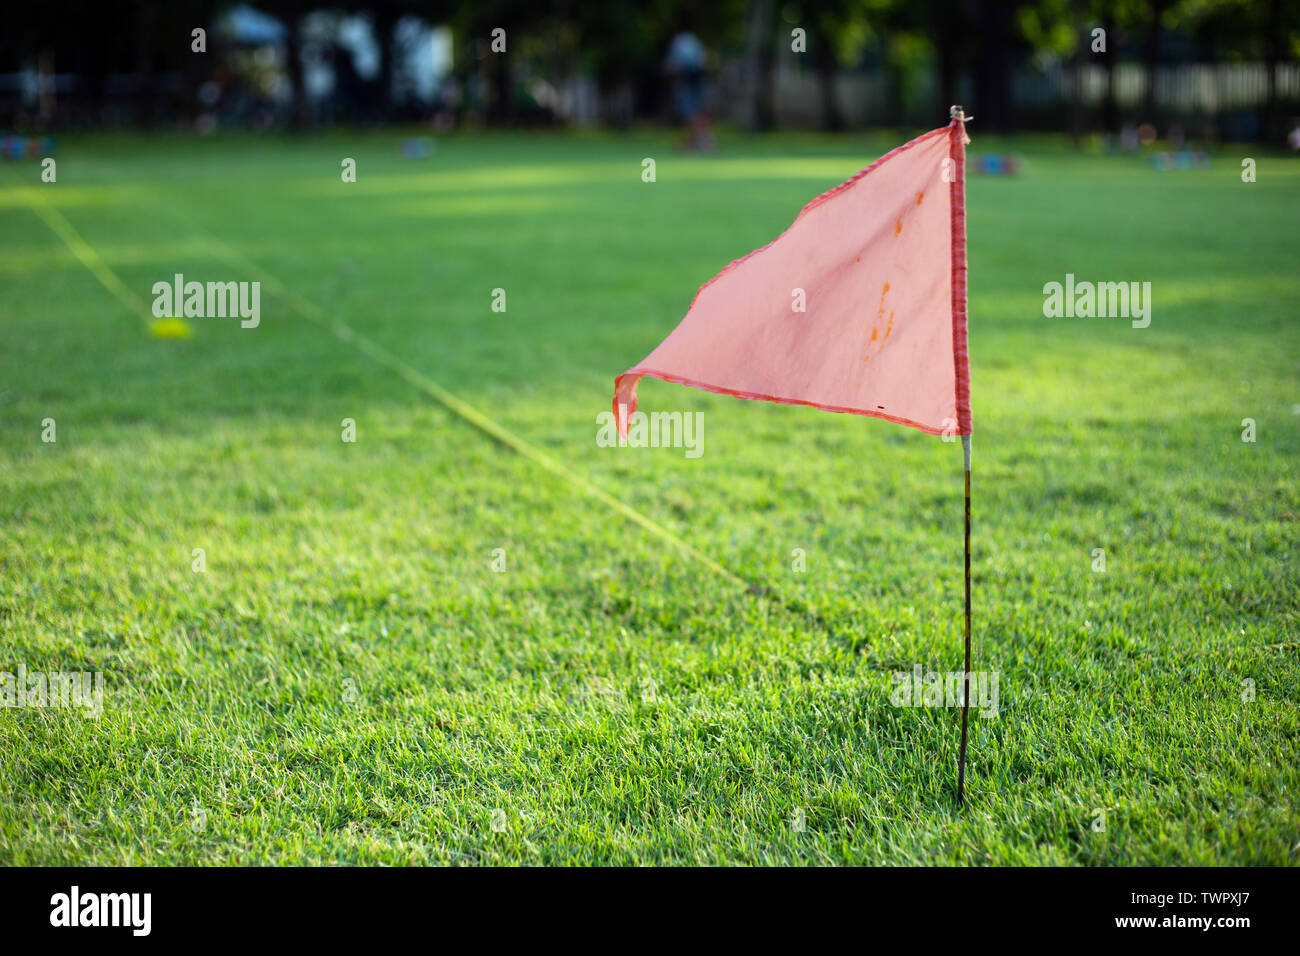 red flag on green grass outdoor sport game Stock Photo